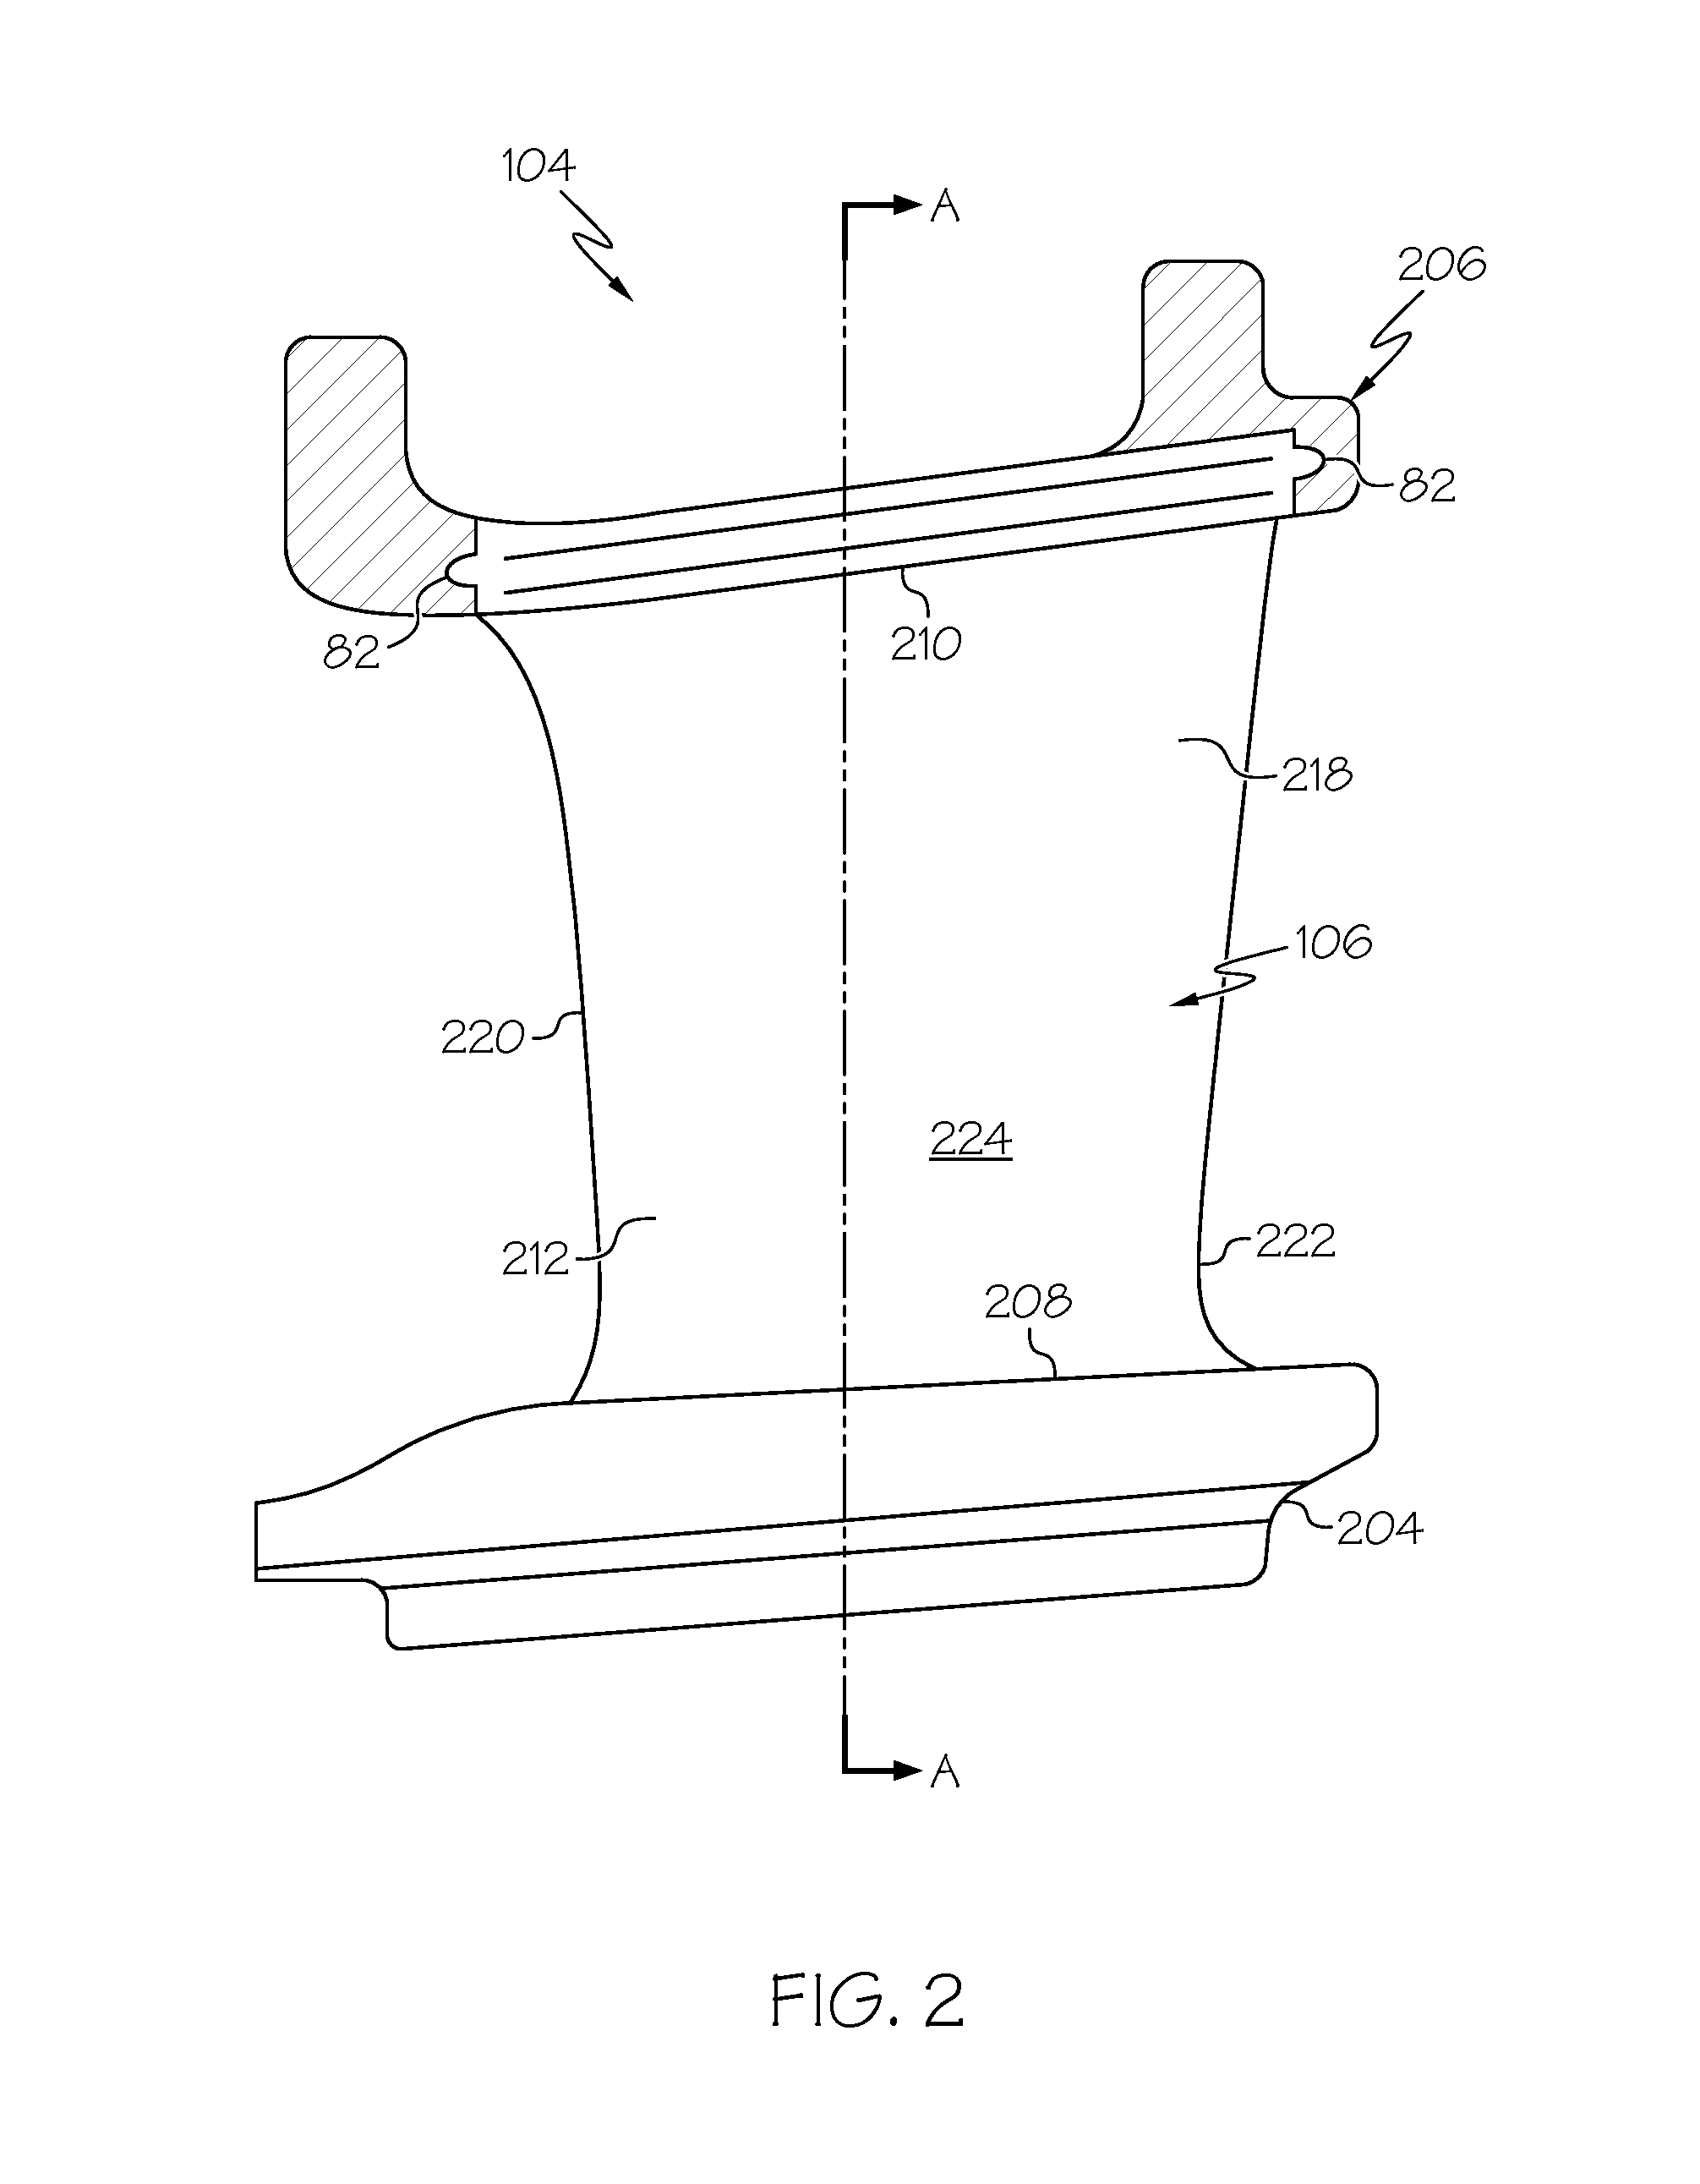 Methods for manufacturing a turbine nozzle with single crystal alloy nozzle segments